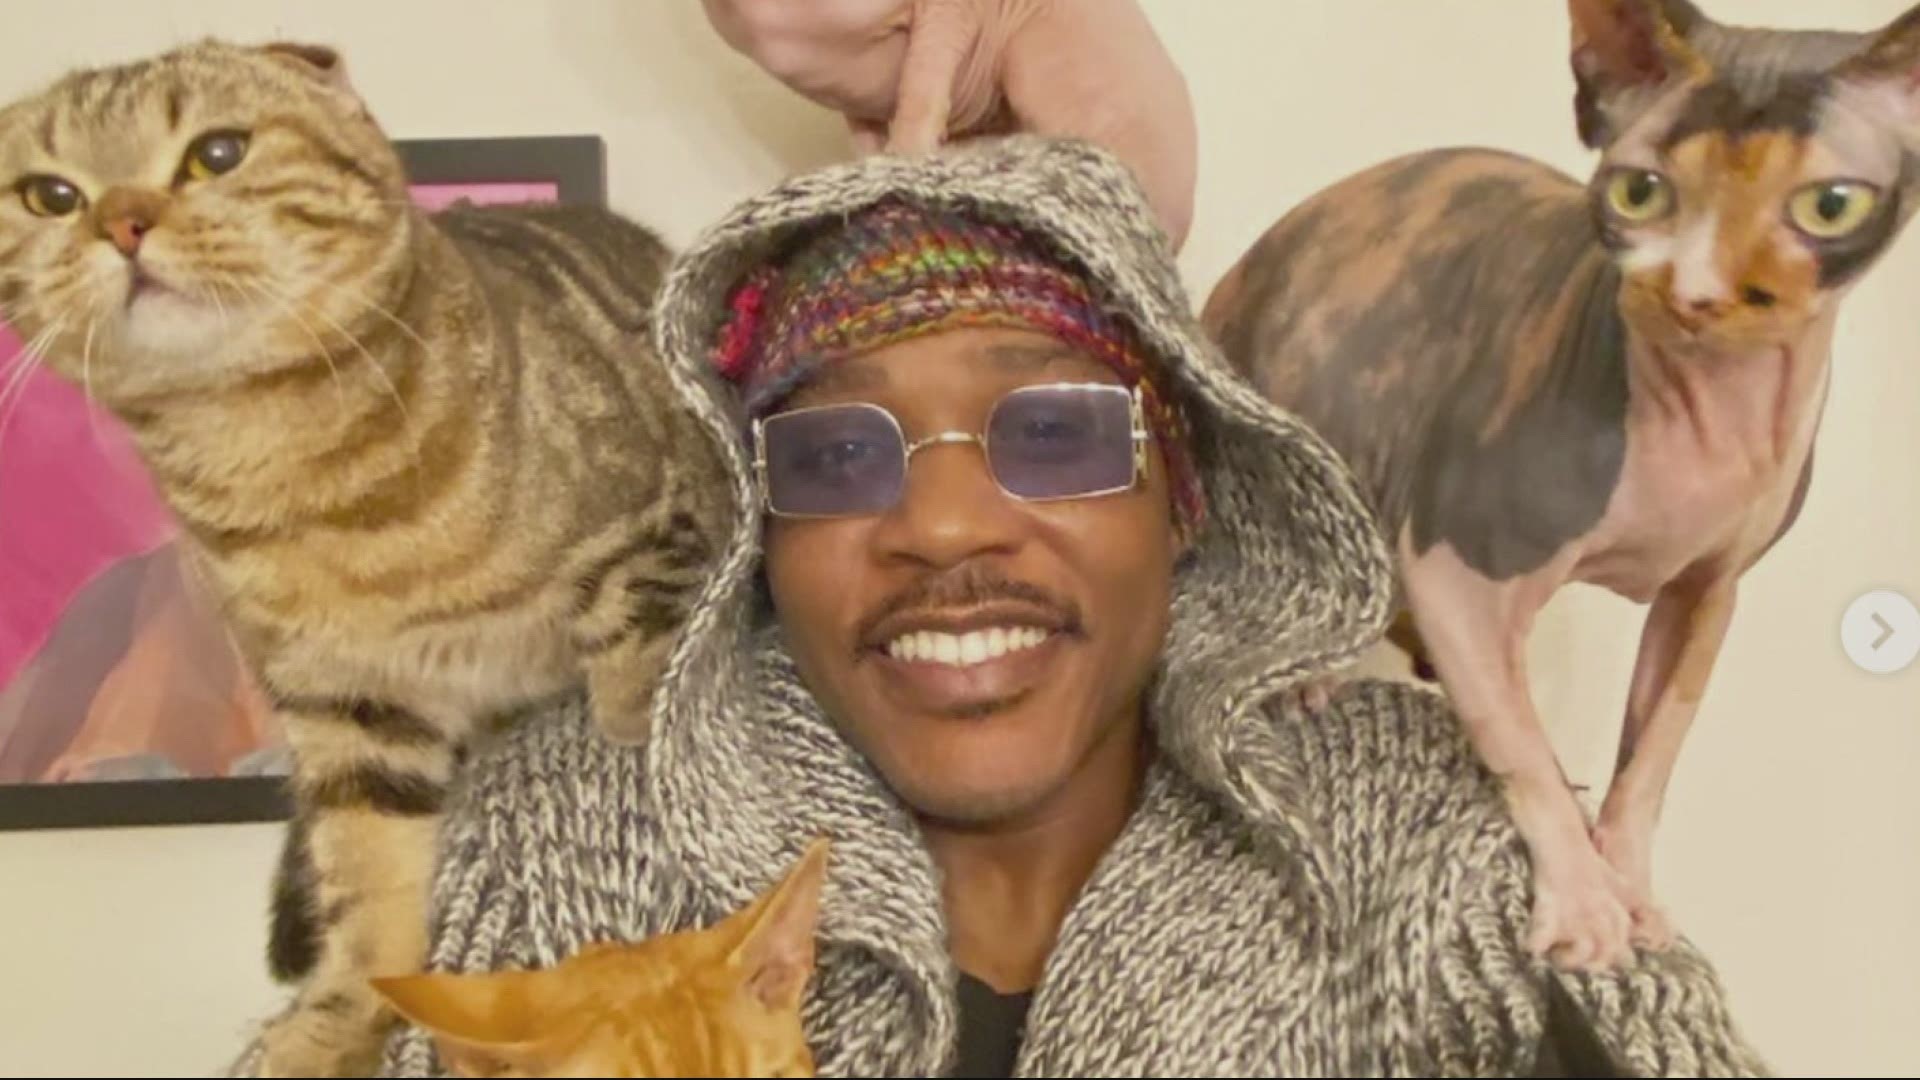 The world will get to know Portland's cat rapper, known as Moshow, a little better thanks to a new Netflix show called "Cat People."